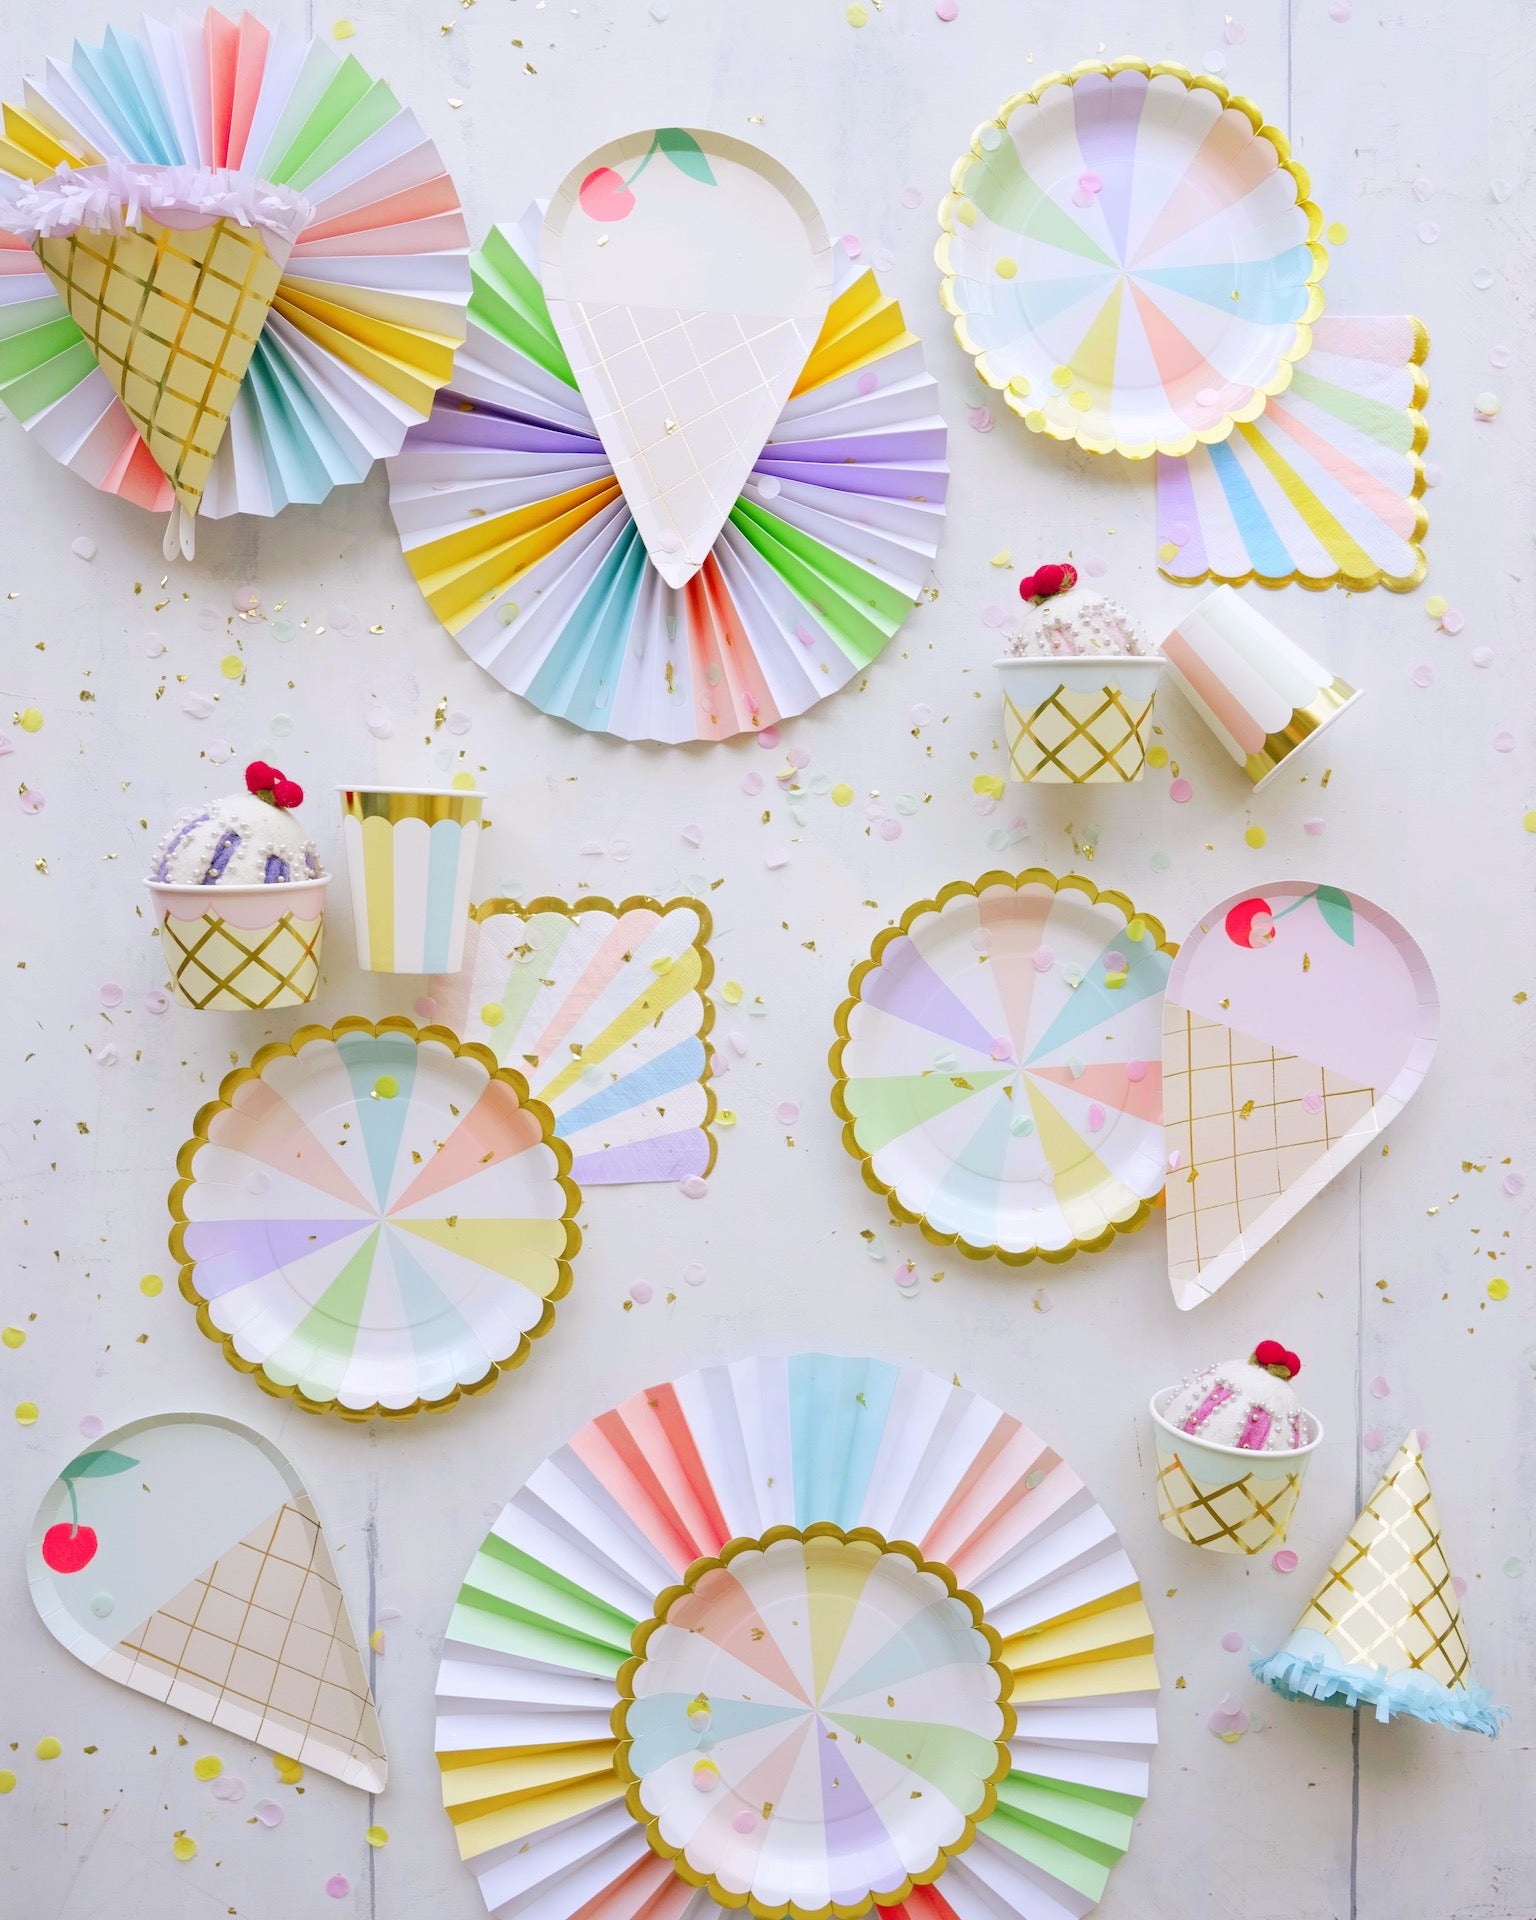 Ice cream party and sweets theme party supplies.